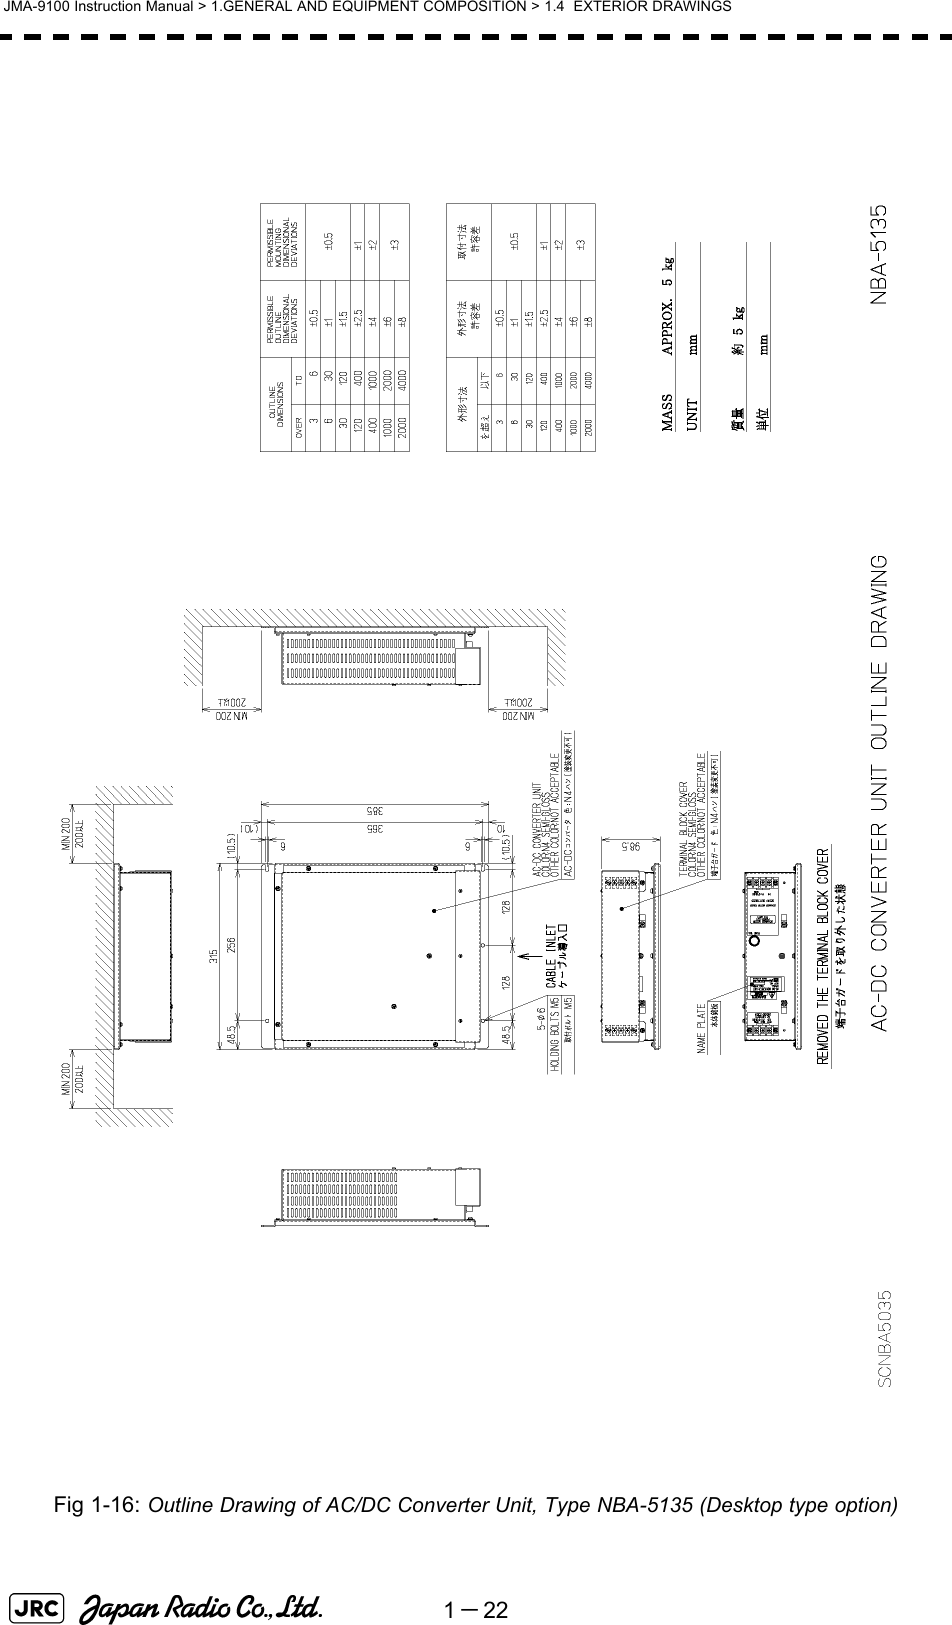 1－22JMA-9100 Instruction Manual &gt; 1.GENERAL AND EQUIPMENT COMPOSITION &gt; 1.4  EXTERIOR DRAWINGSFig 1-16: Outline Drawing of AC/DC Converter Unit, Type NBA-5135 (Desktop type option)